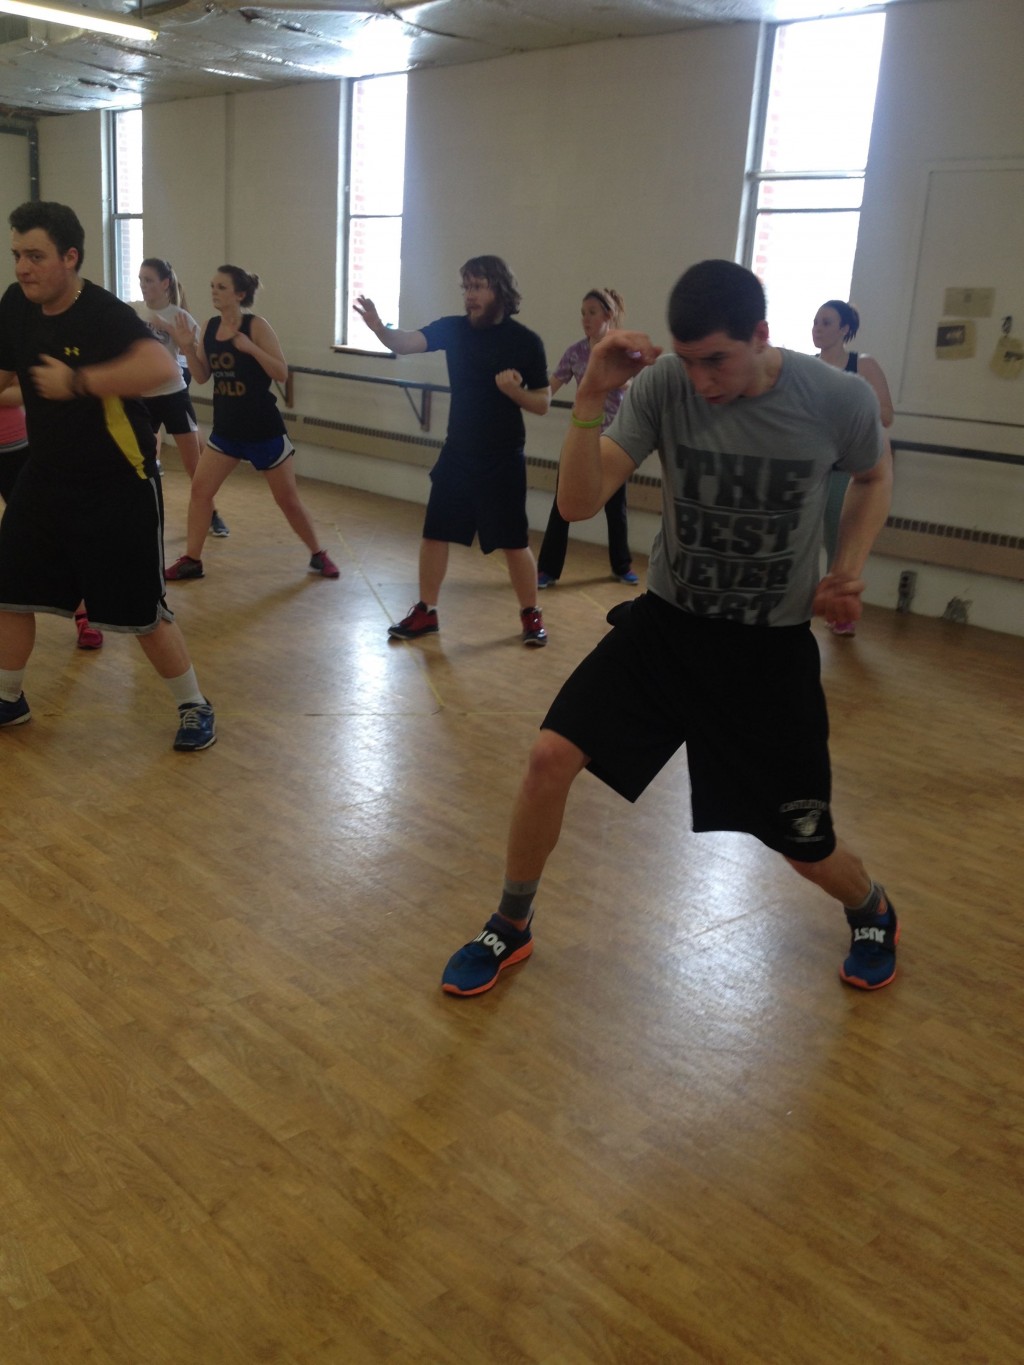 Kickboxing class about more than just exercise